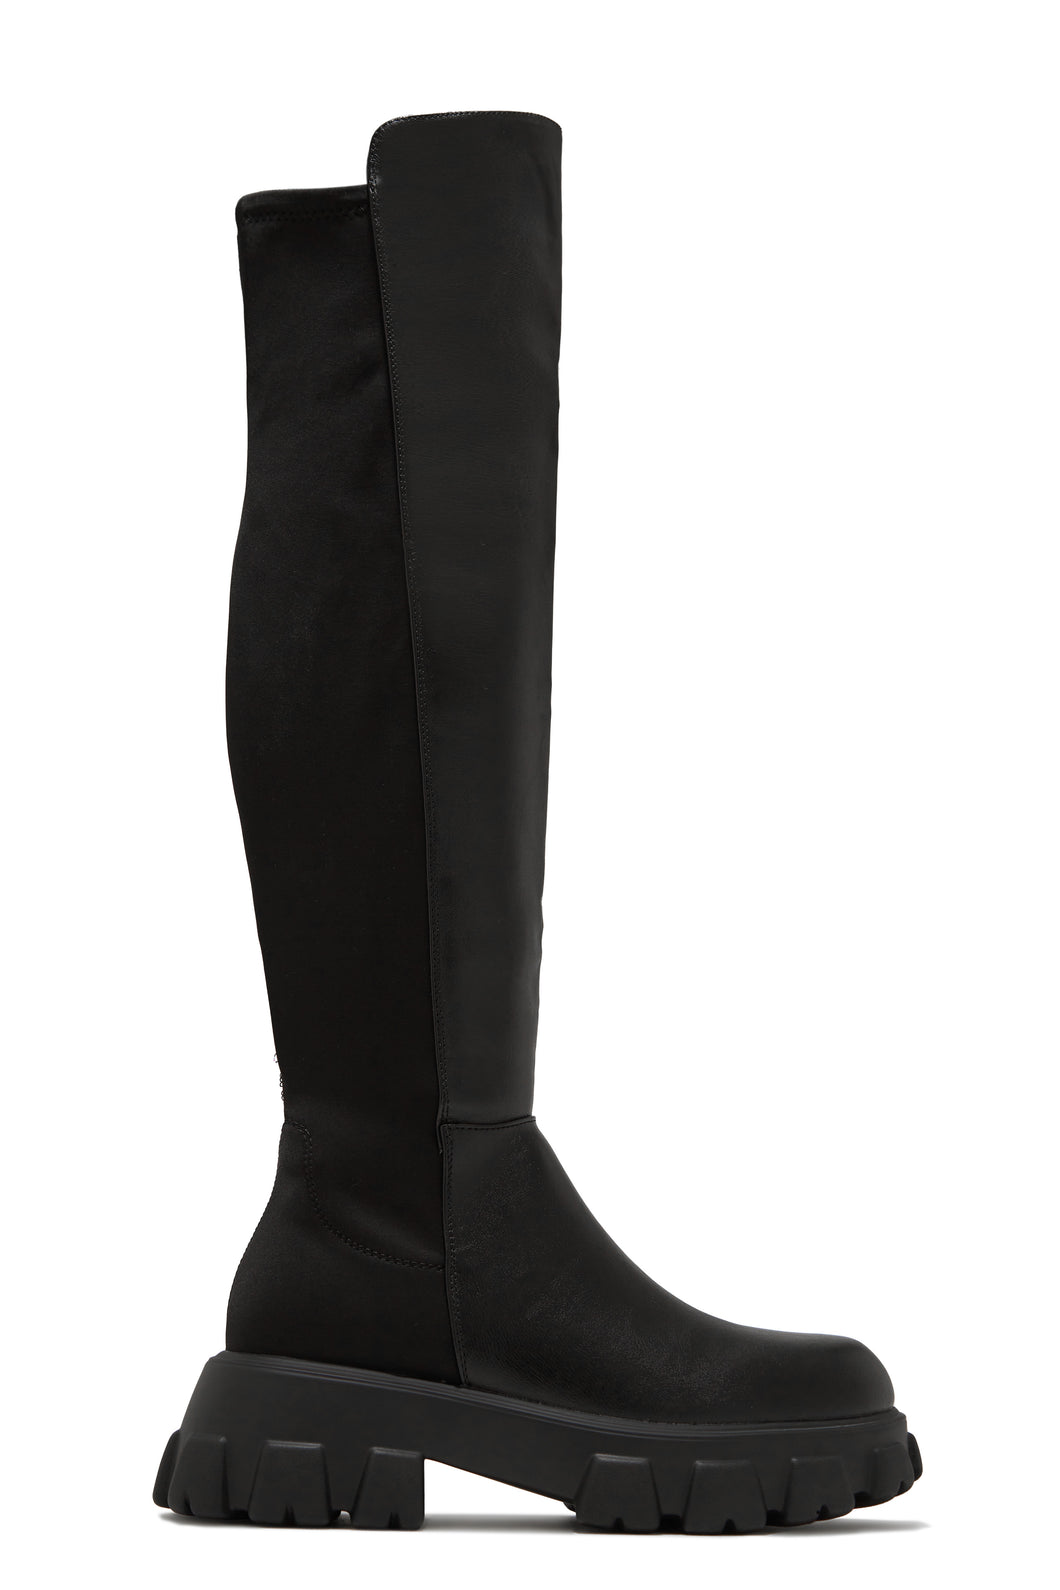 Fall Outfit Over The Knee Flat Boots - Black